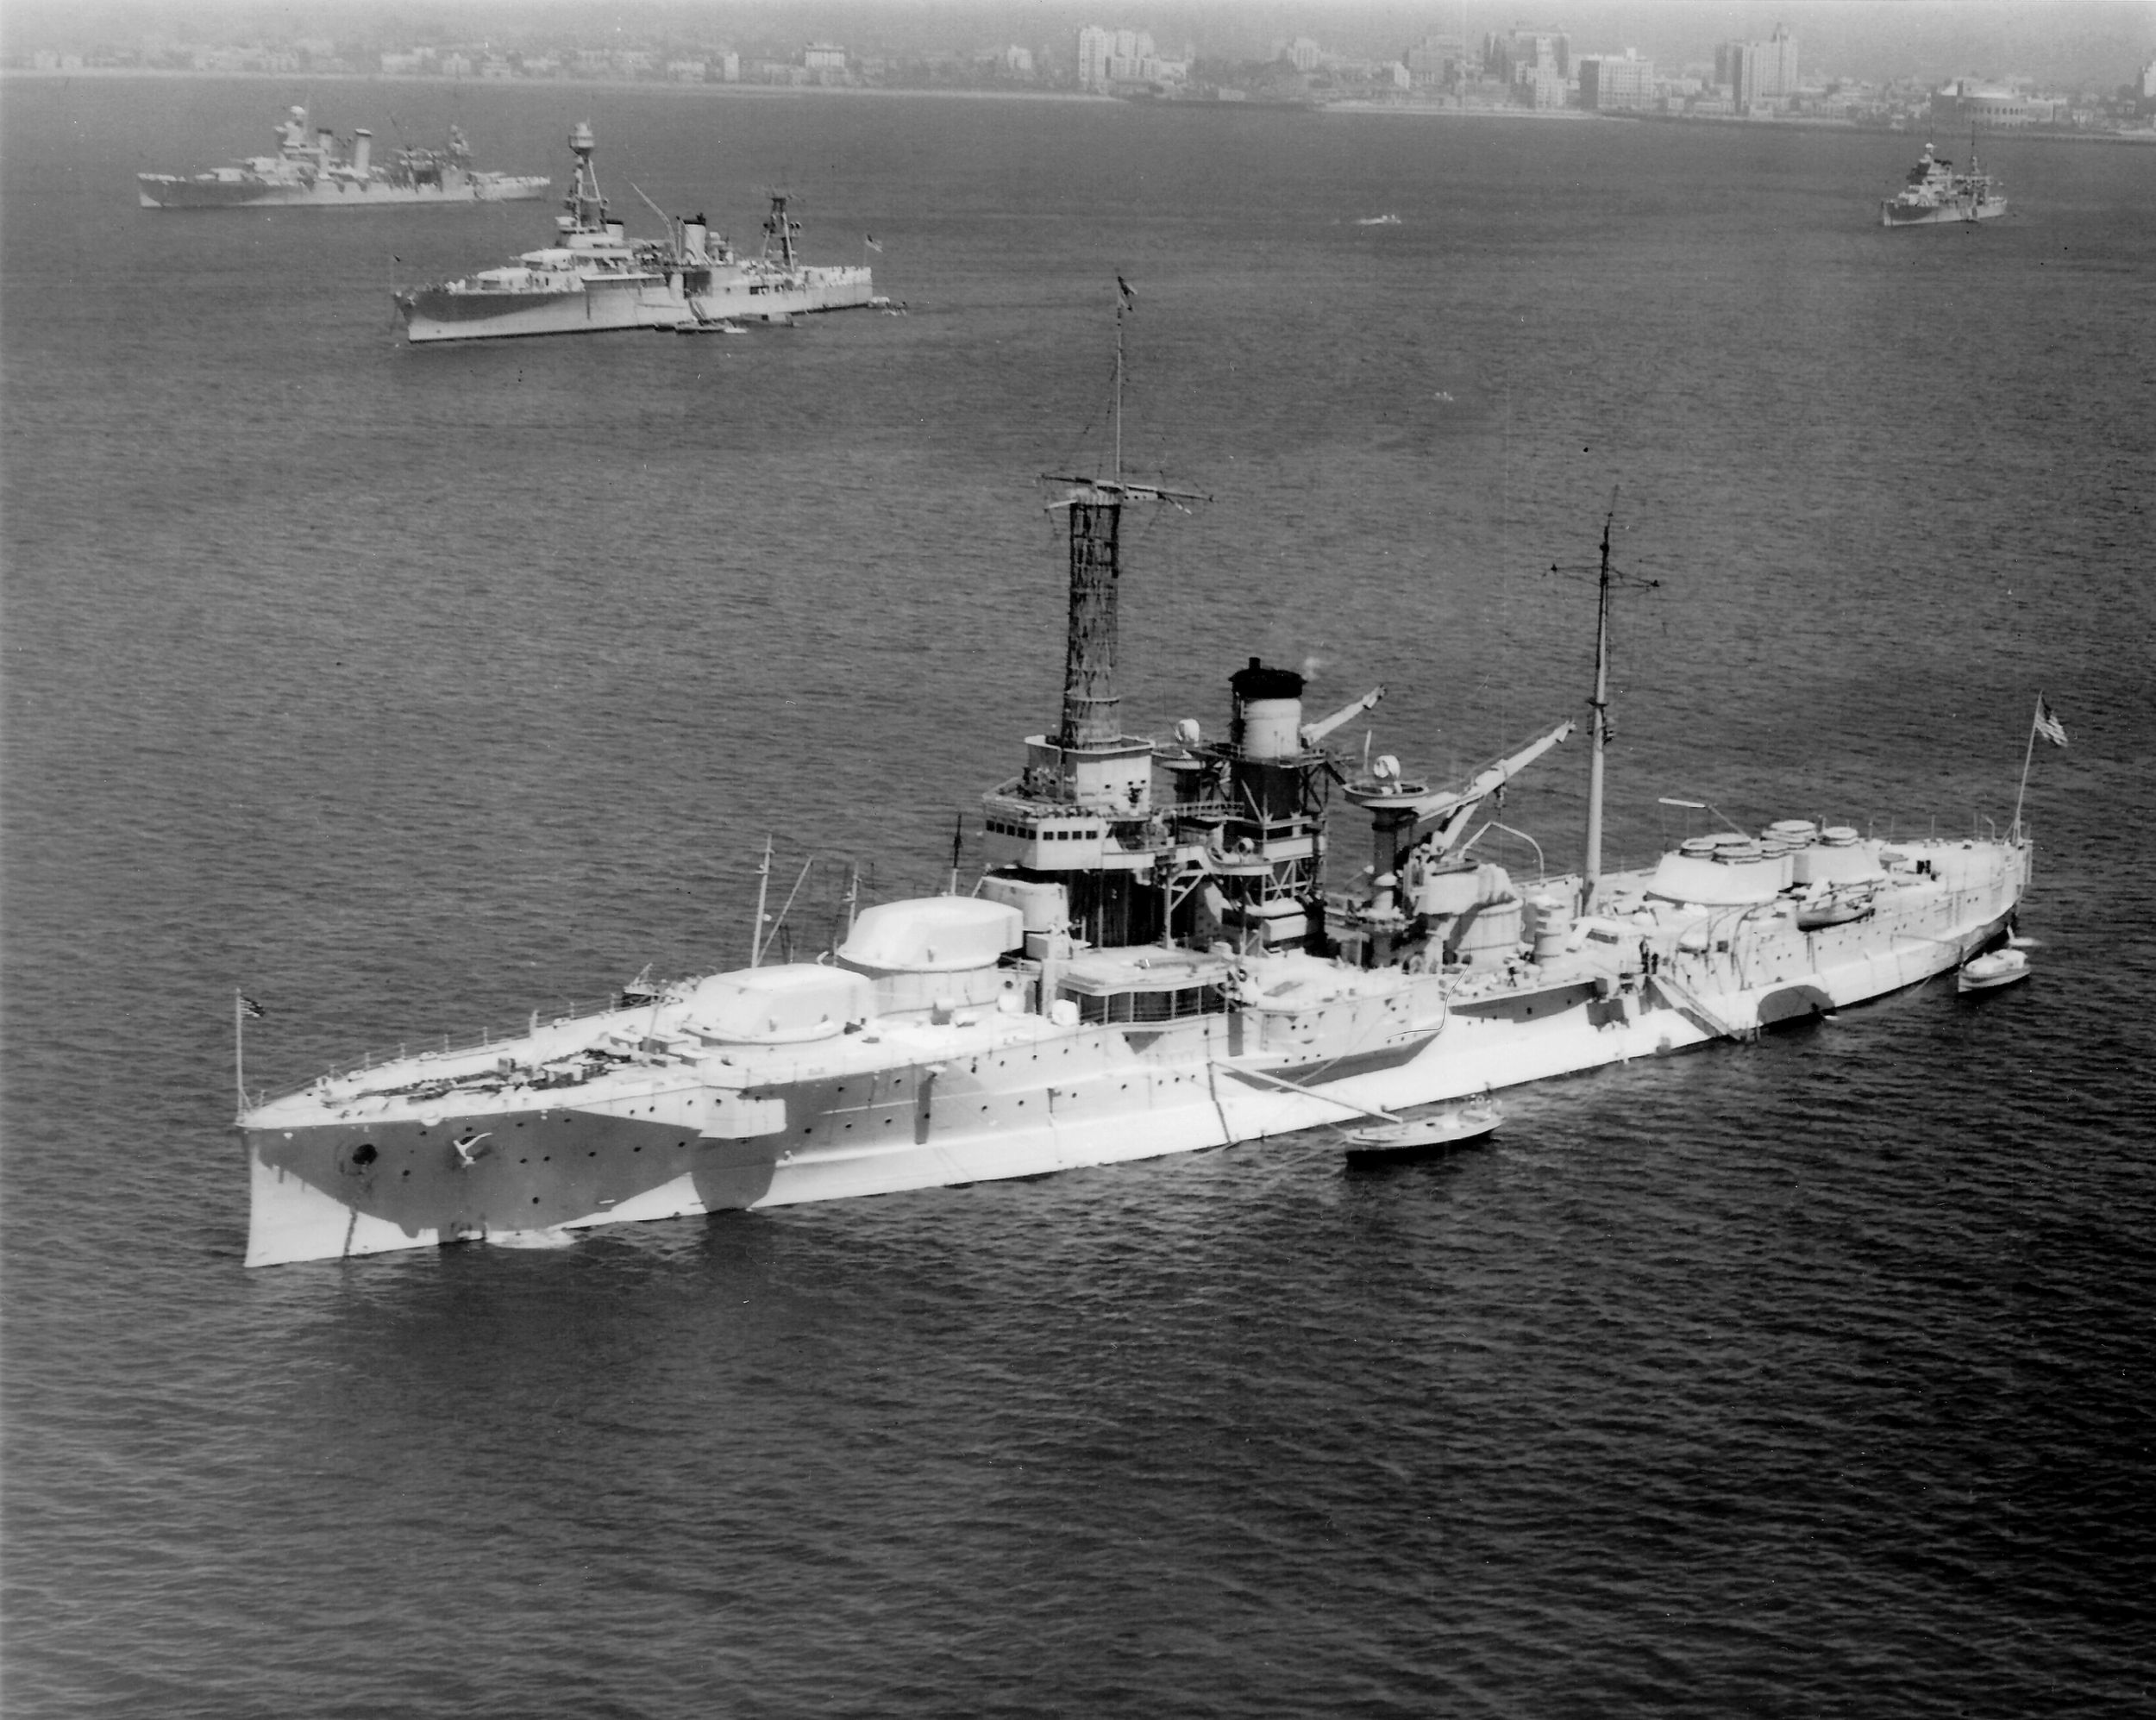 While serving as a target ship off Long Beach, California, on April 18, 1935, the USS Utah lies at anchor. The aging warship's armaments had been previously removed to comply with the terms of the London Naval Treaty.